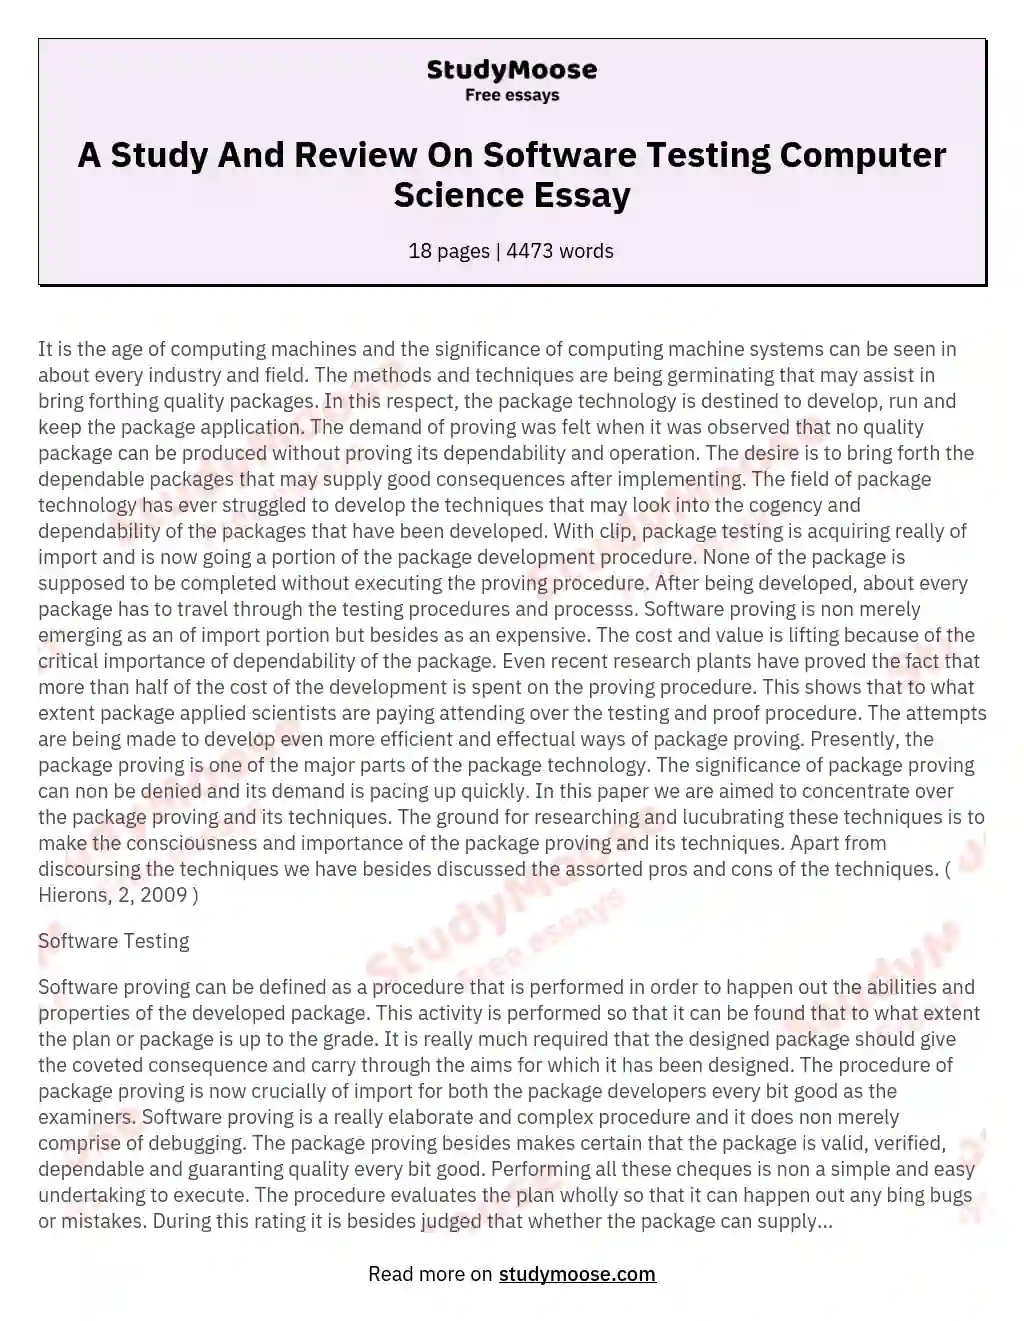 A Study And Review On Software Testing Computer Science Essay essay